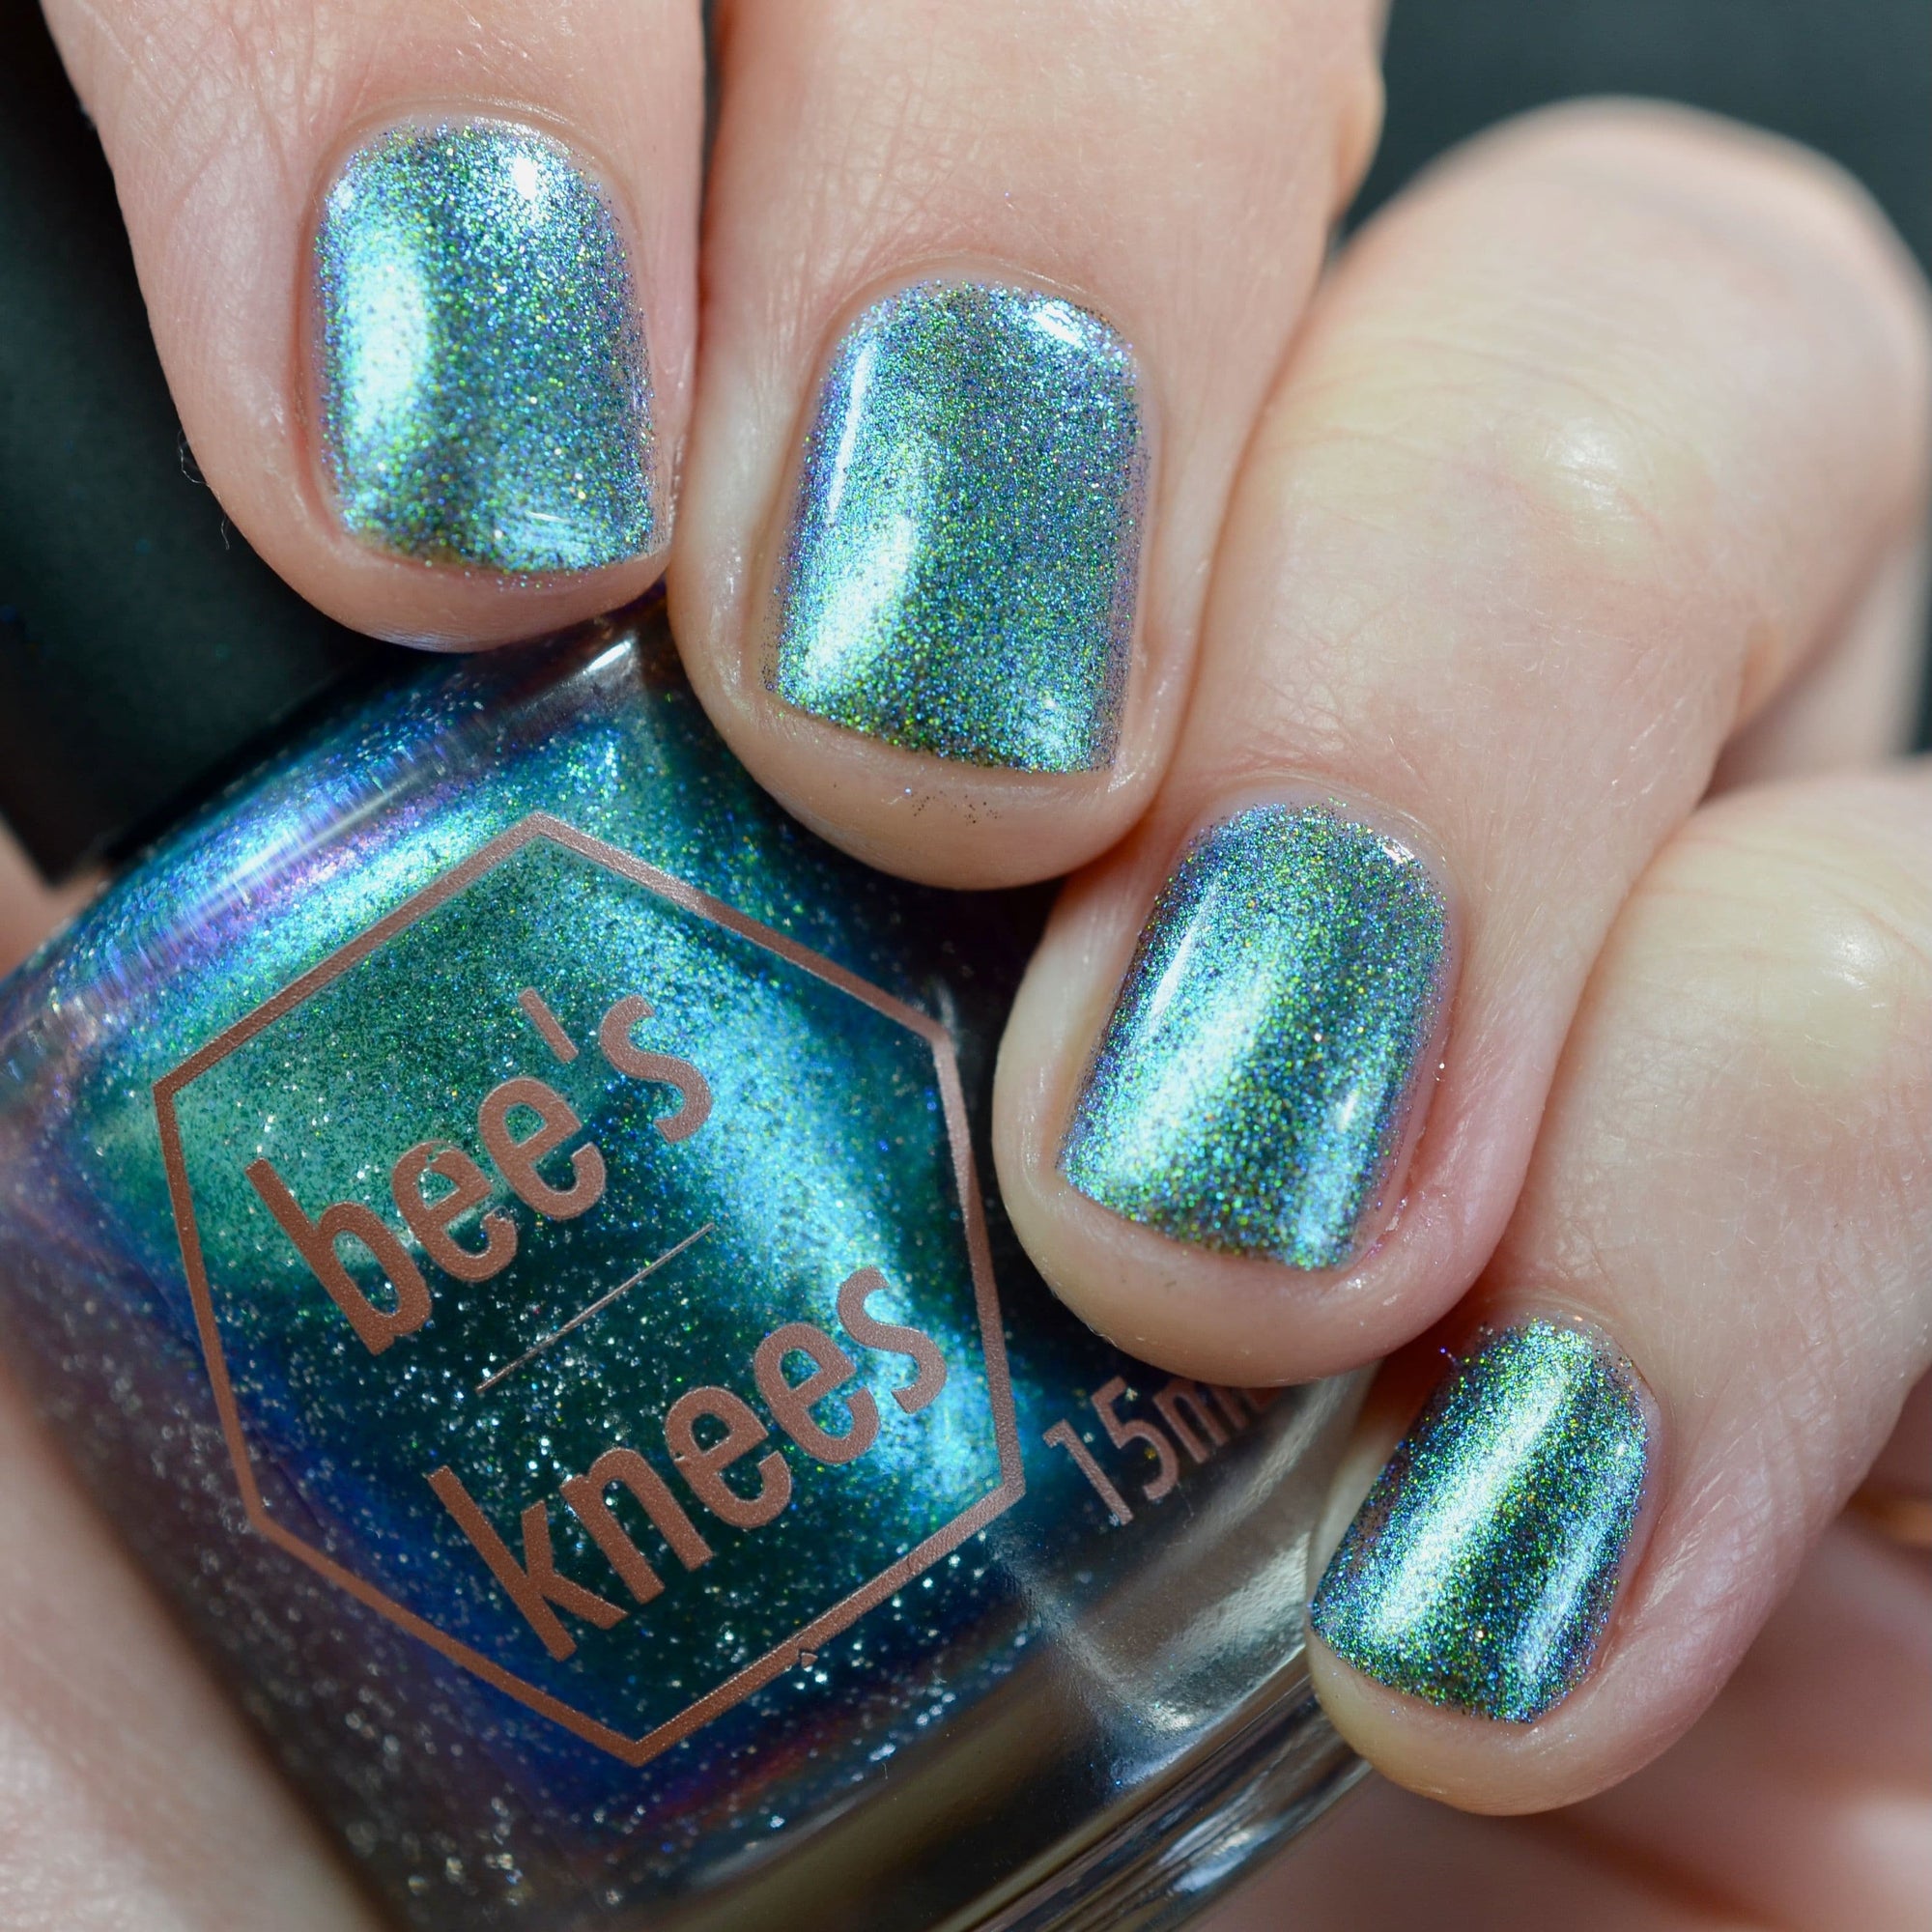 *PRE-ORDER* Bee's Knees Lacquer - Starfire